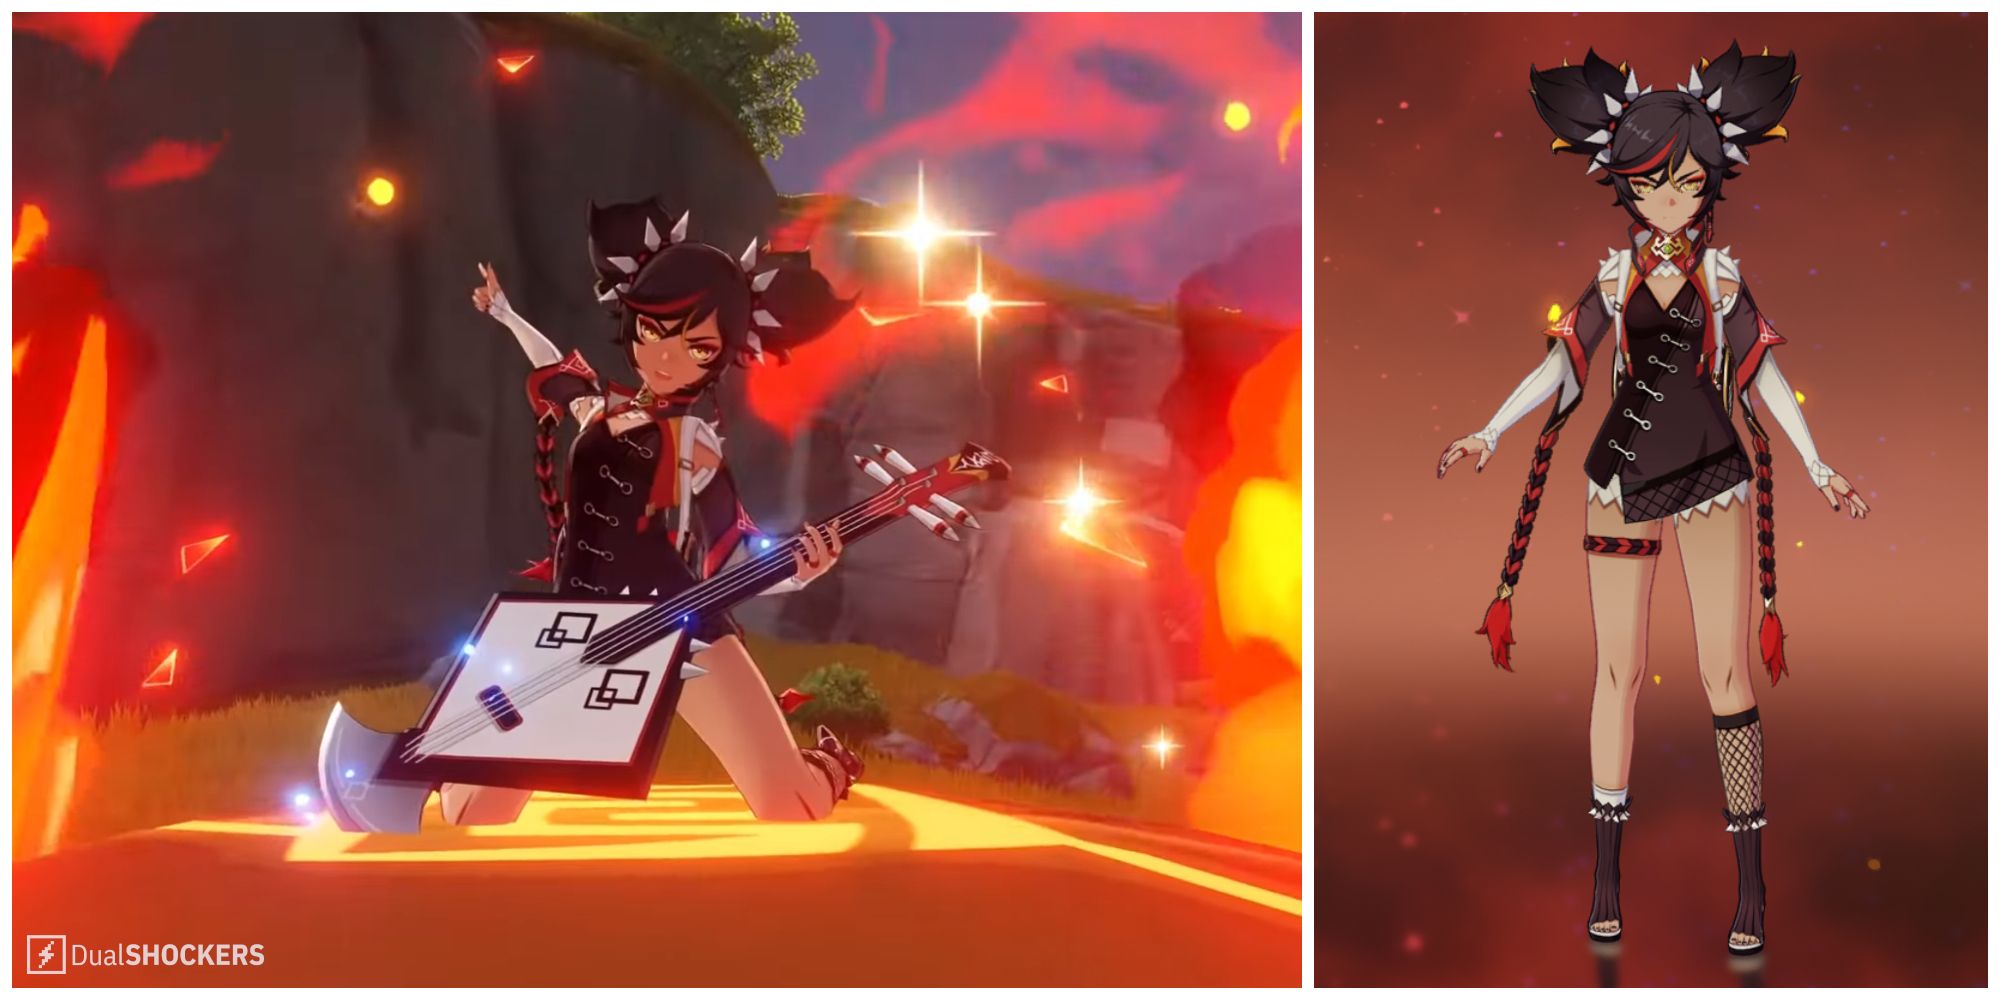 Split image of Xinyan in a character demo and Xinyan in her profile from Genshin Impact.